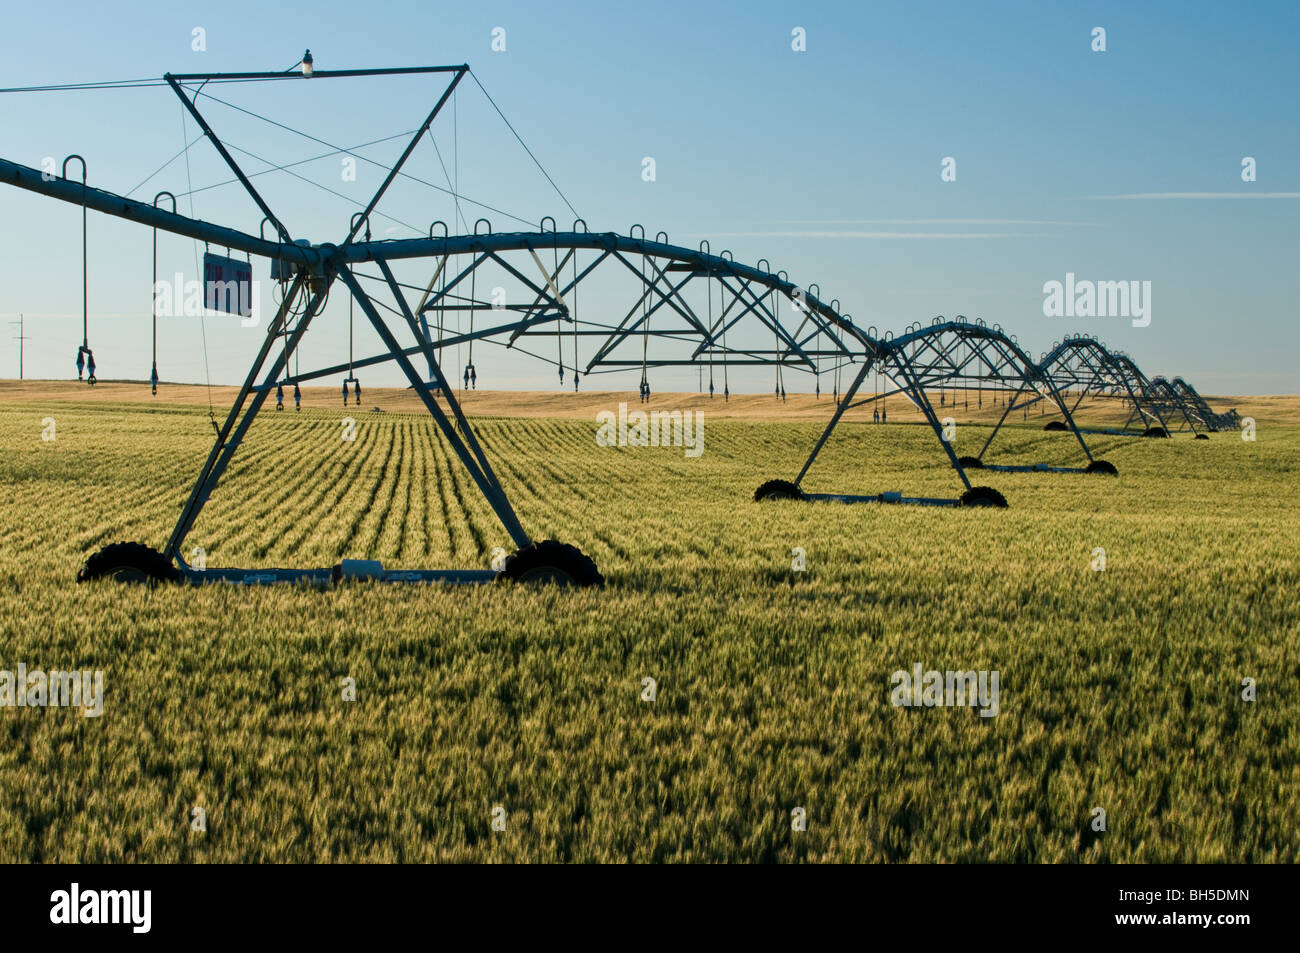 wheat-field-and-irrigation-system-BH5DMN